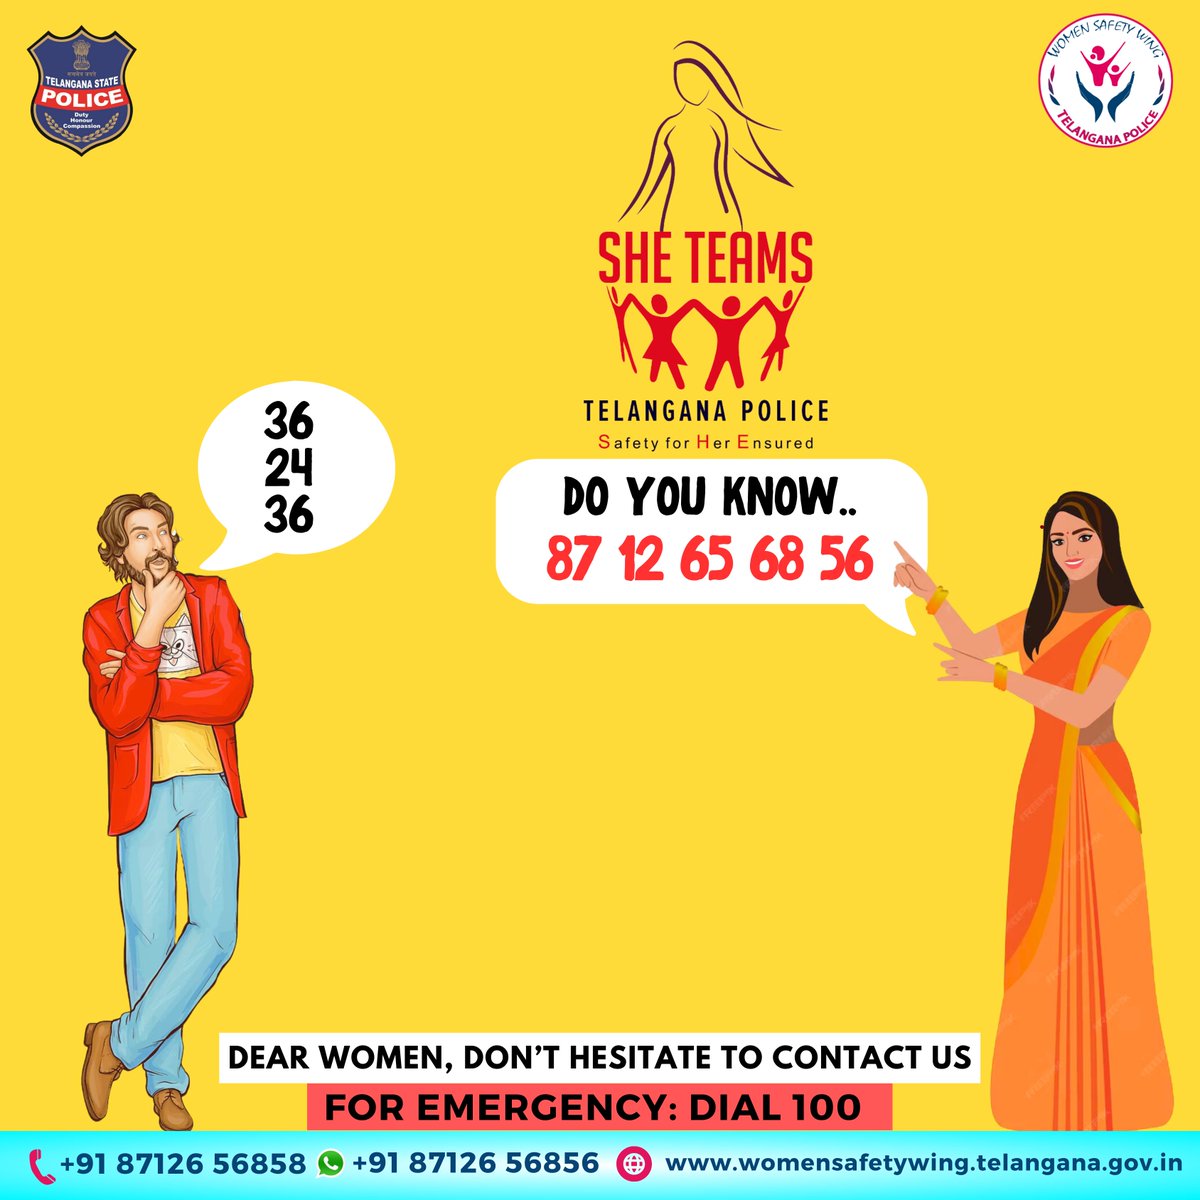 Dear Women, Don’t hesitate to call us.
We are always there for you.

⚠️WARNING: @TS_SheTeams are always watching you!

#SheTeams #WomenSafetyWing #TelanganaPolice #Women #Woman #StreetHarassment #Telangana #BeAware